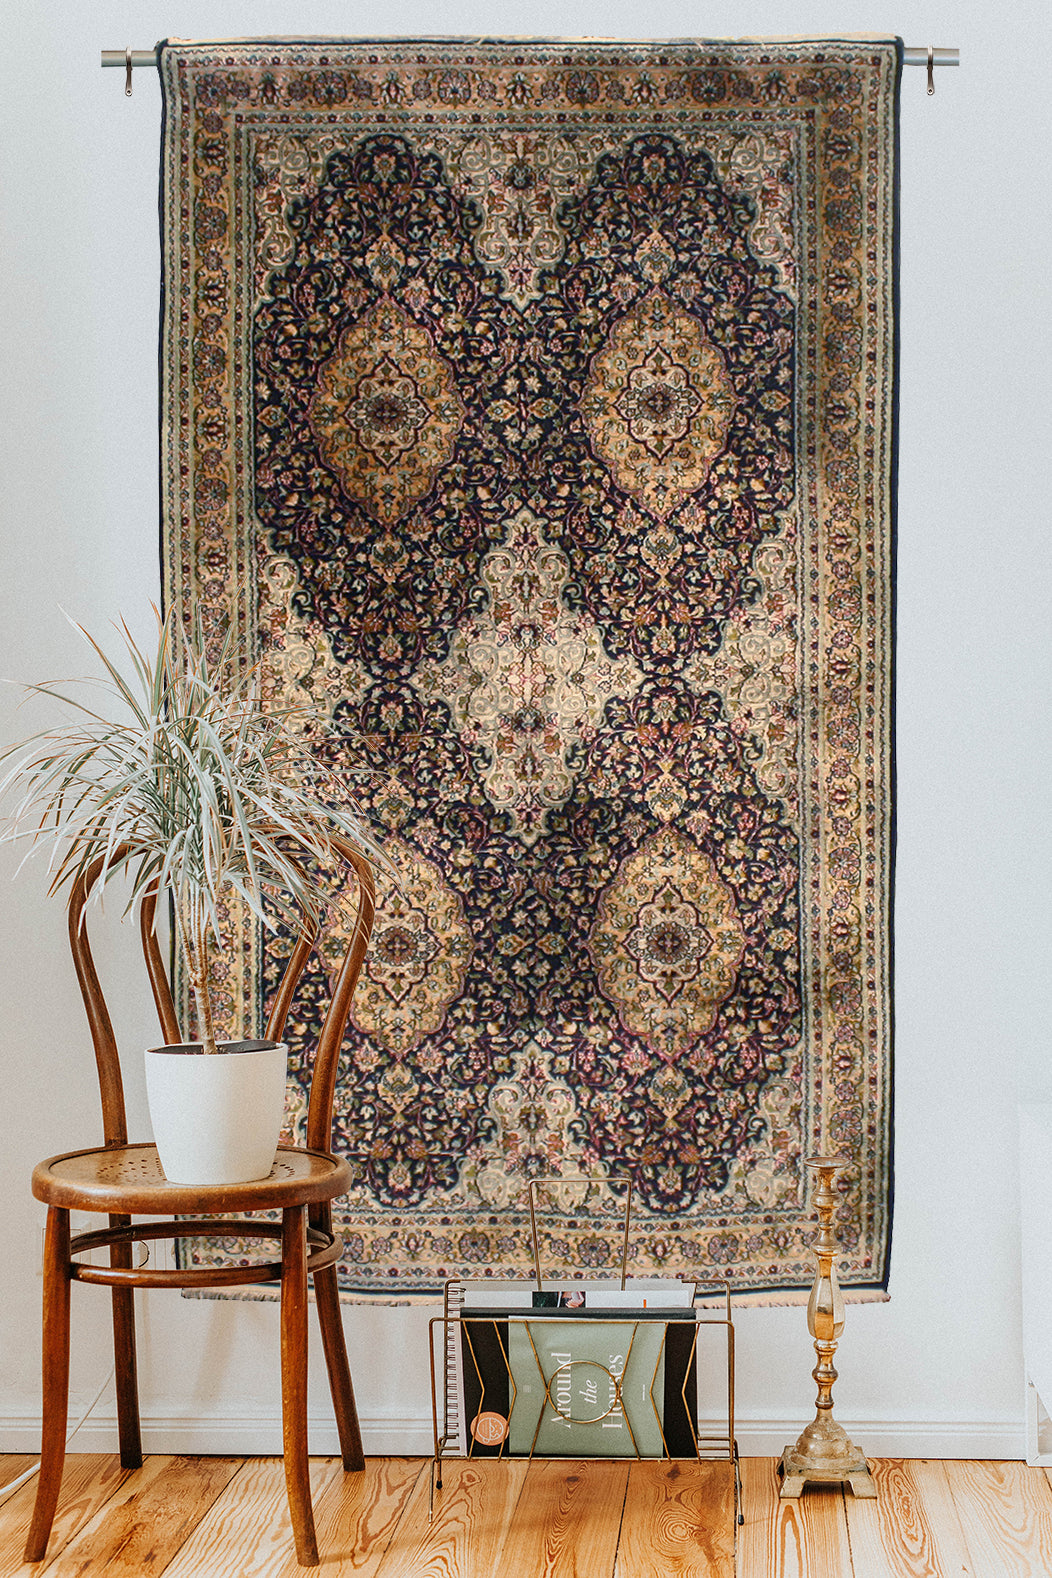 How to Hang A Rug on the Wall | Main Street Oriental Rugs